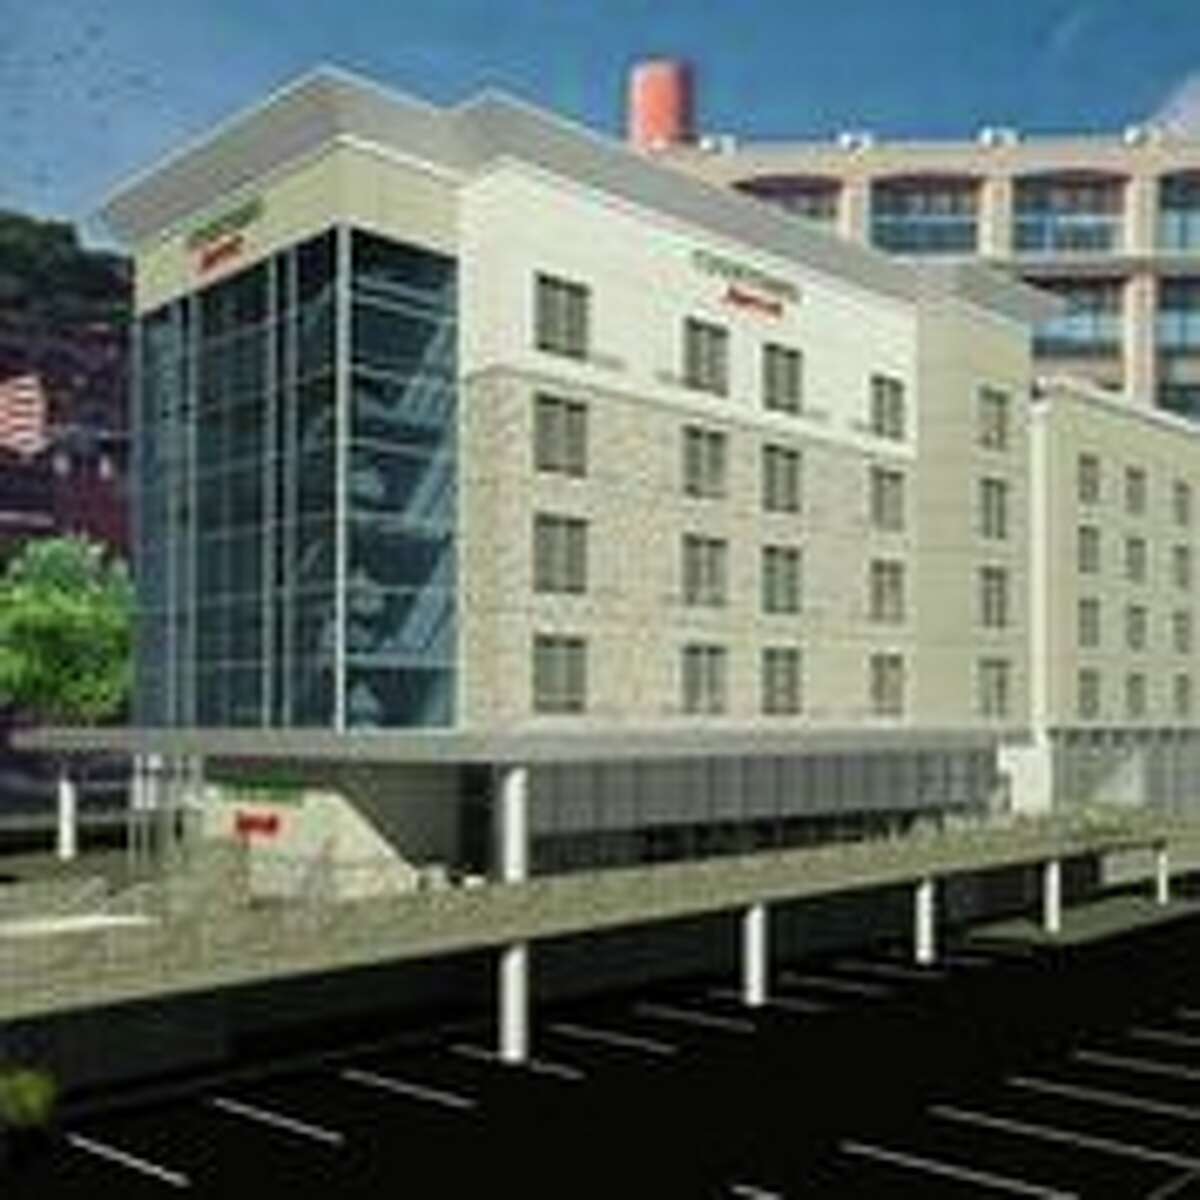 Site work has begun on the new Courtyard by Marriott hotel on River Street in Troy. Completion is set for next summer.